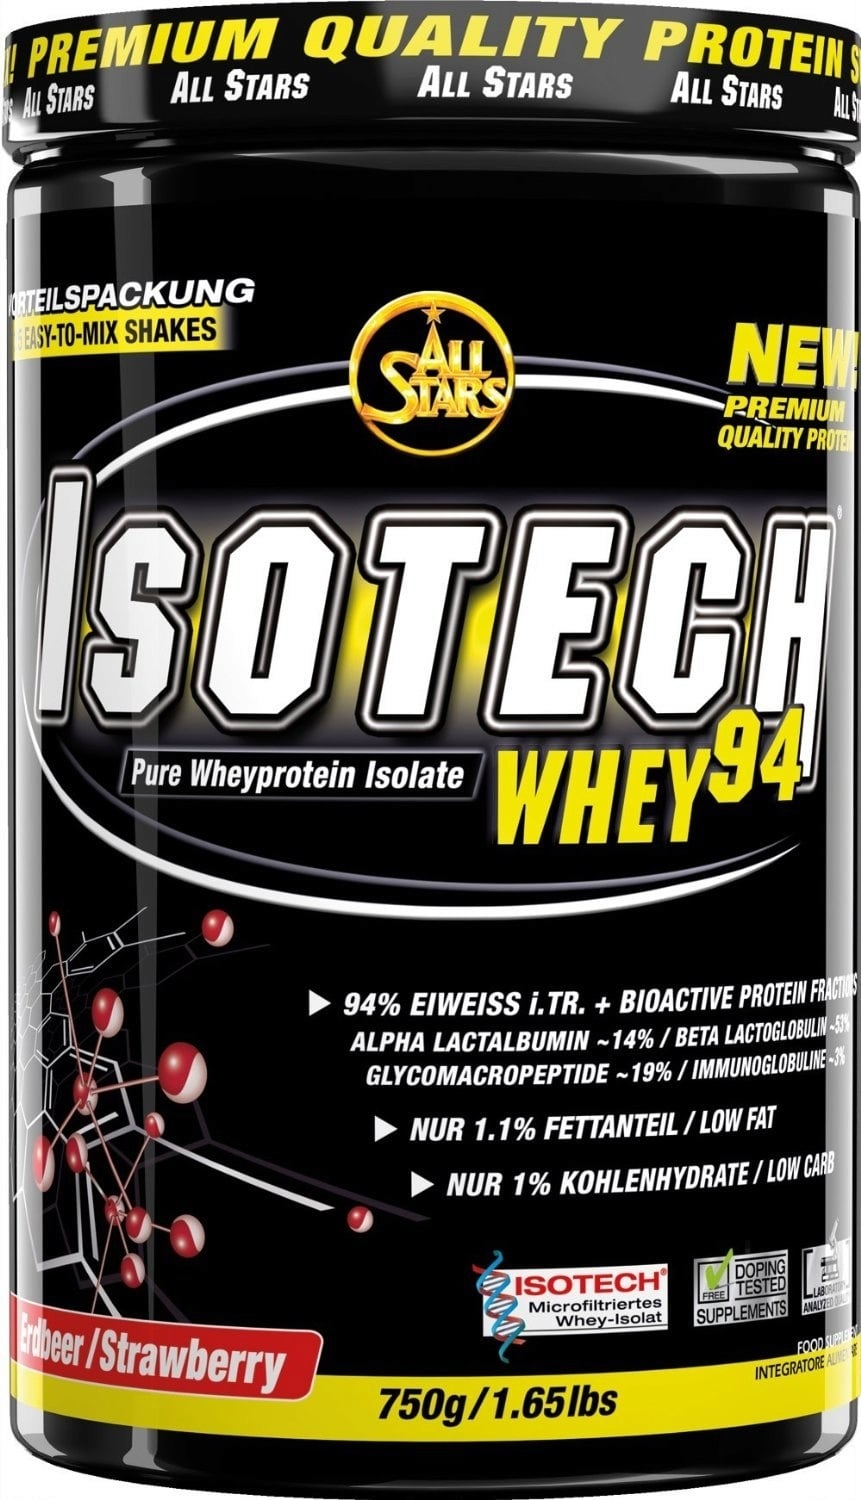 All Stars Isotech Whey 94 - Strawberry